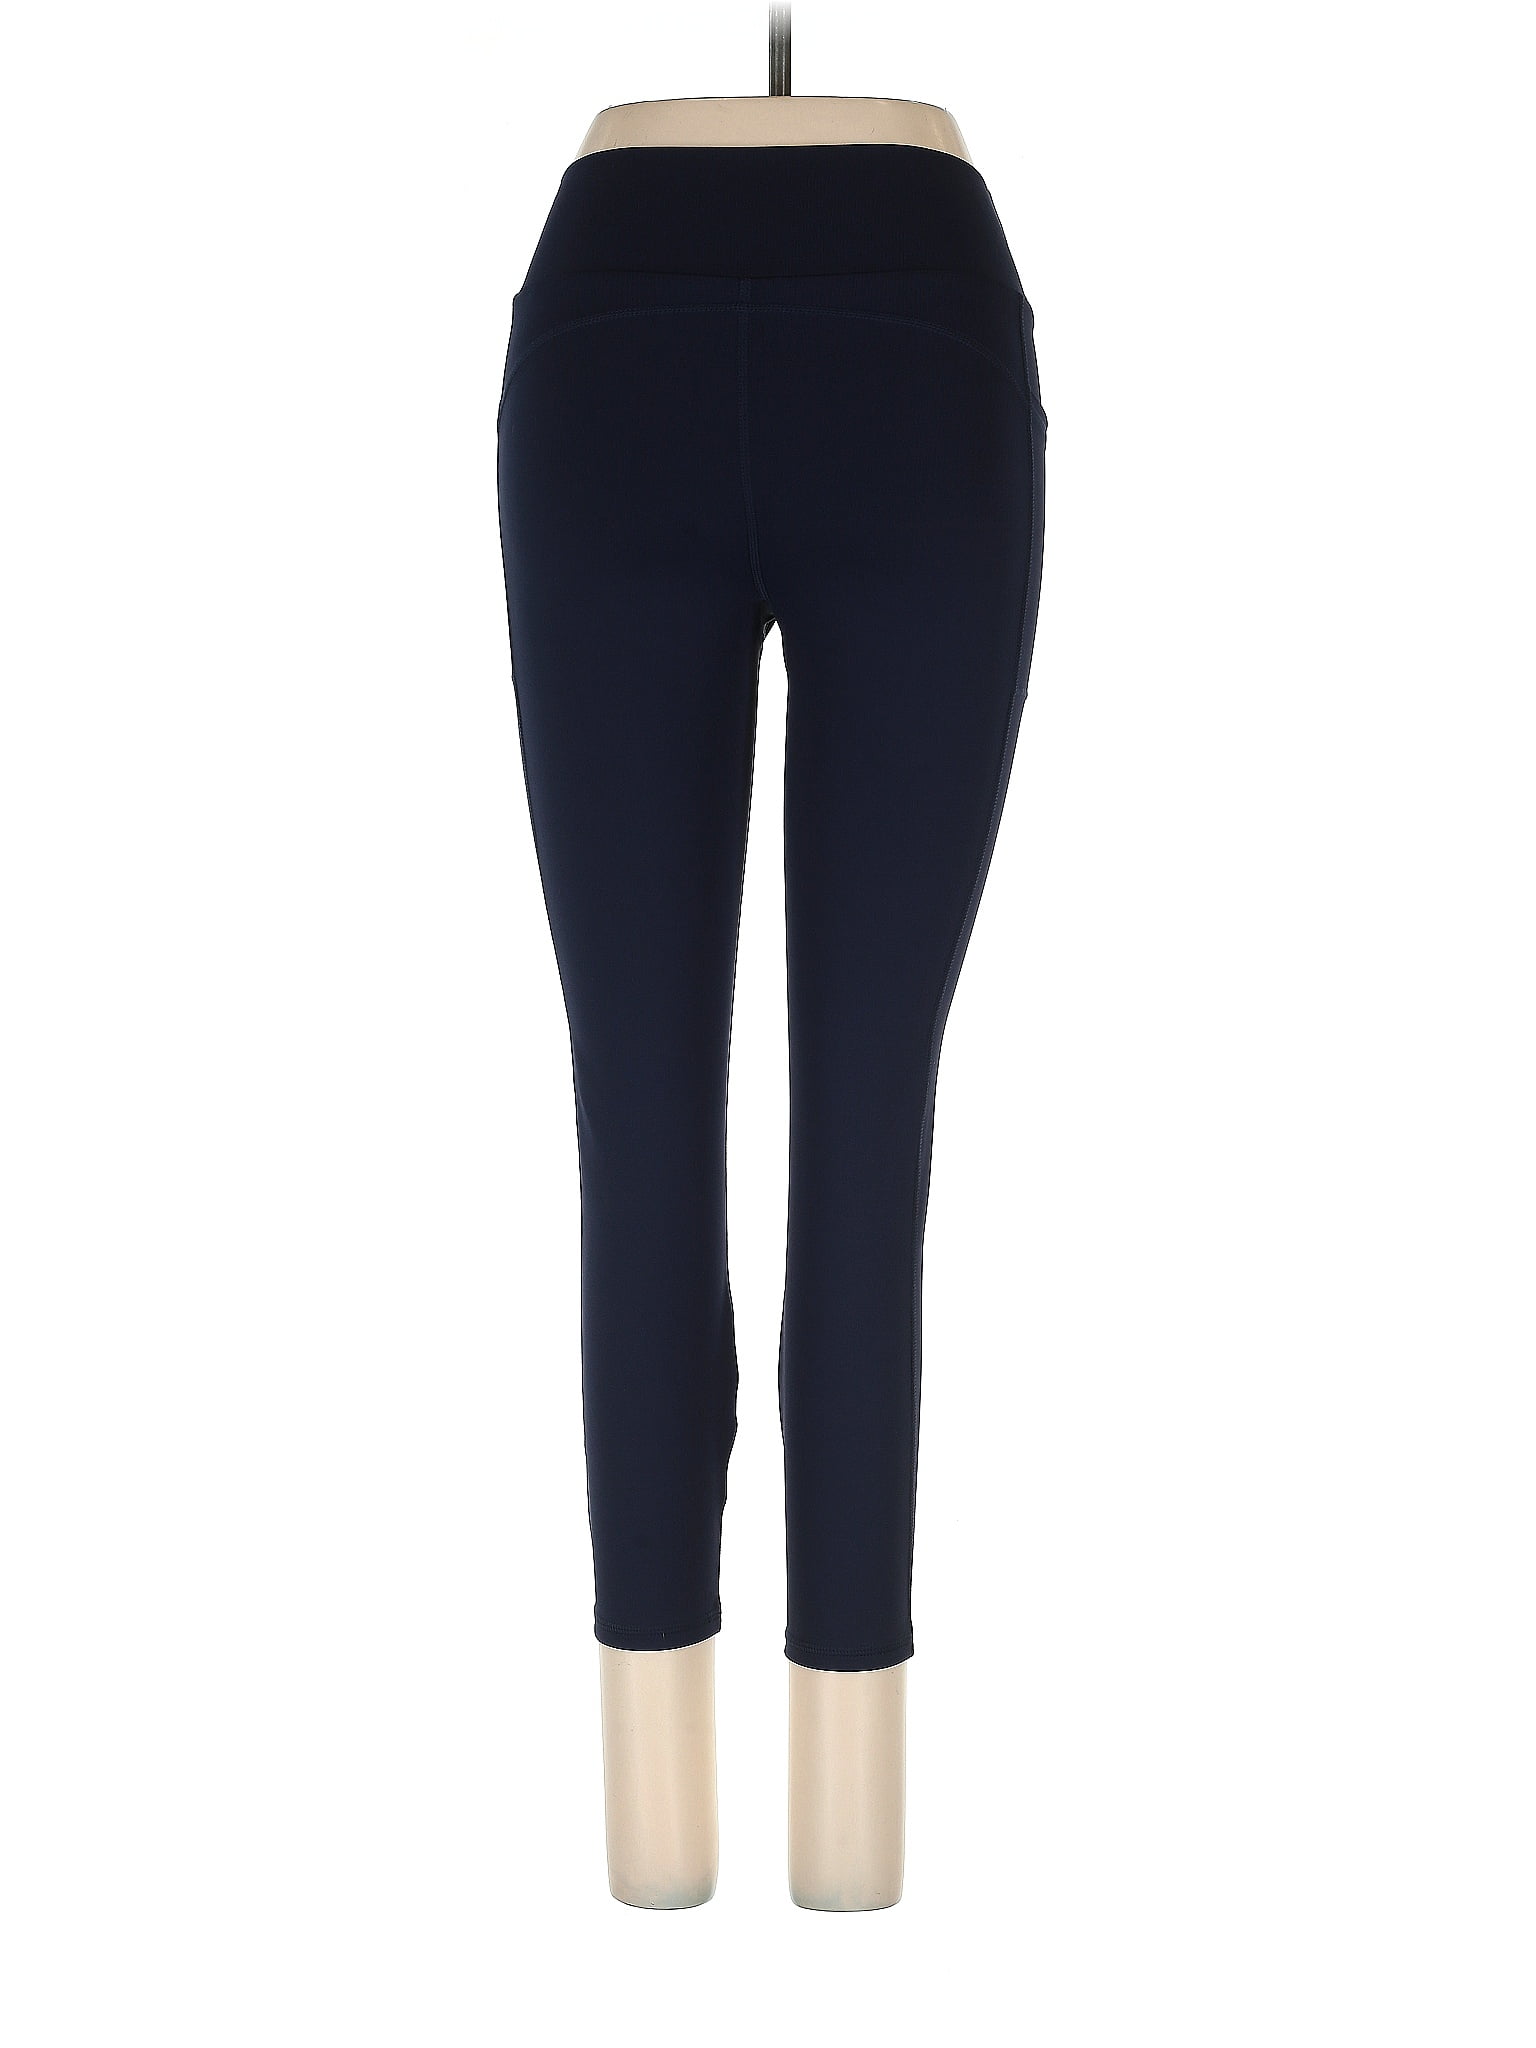 S.G. SPORT Collection Navy Blue Leggings Size XS (Petite) - 7% off